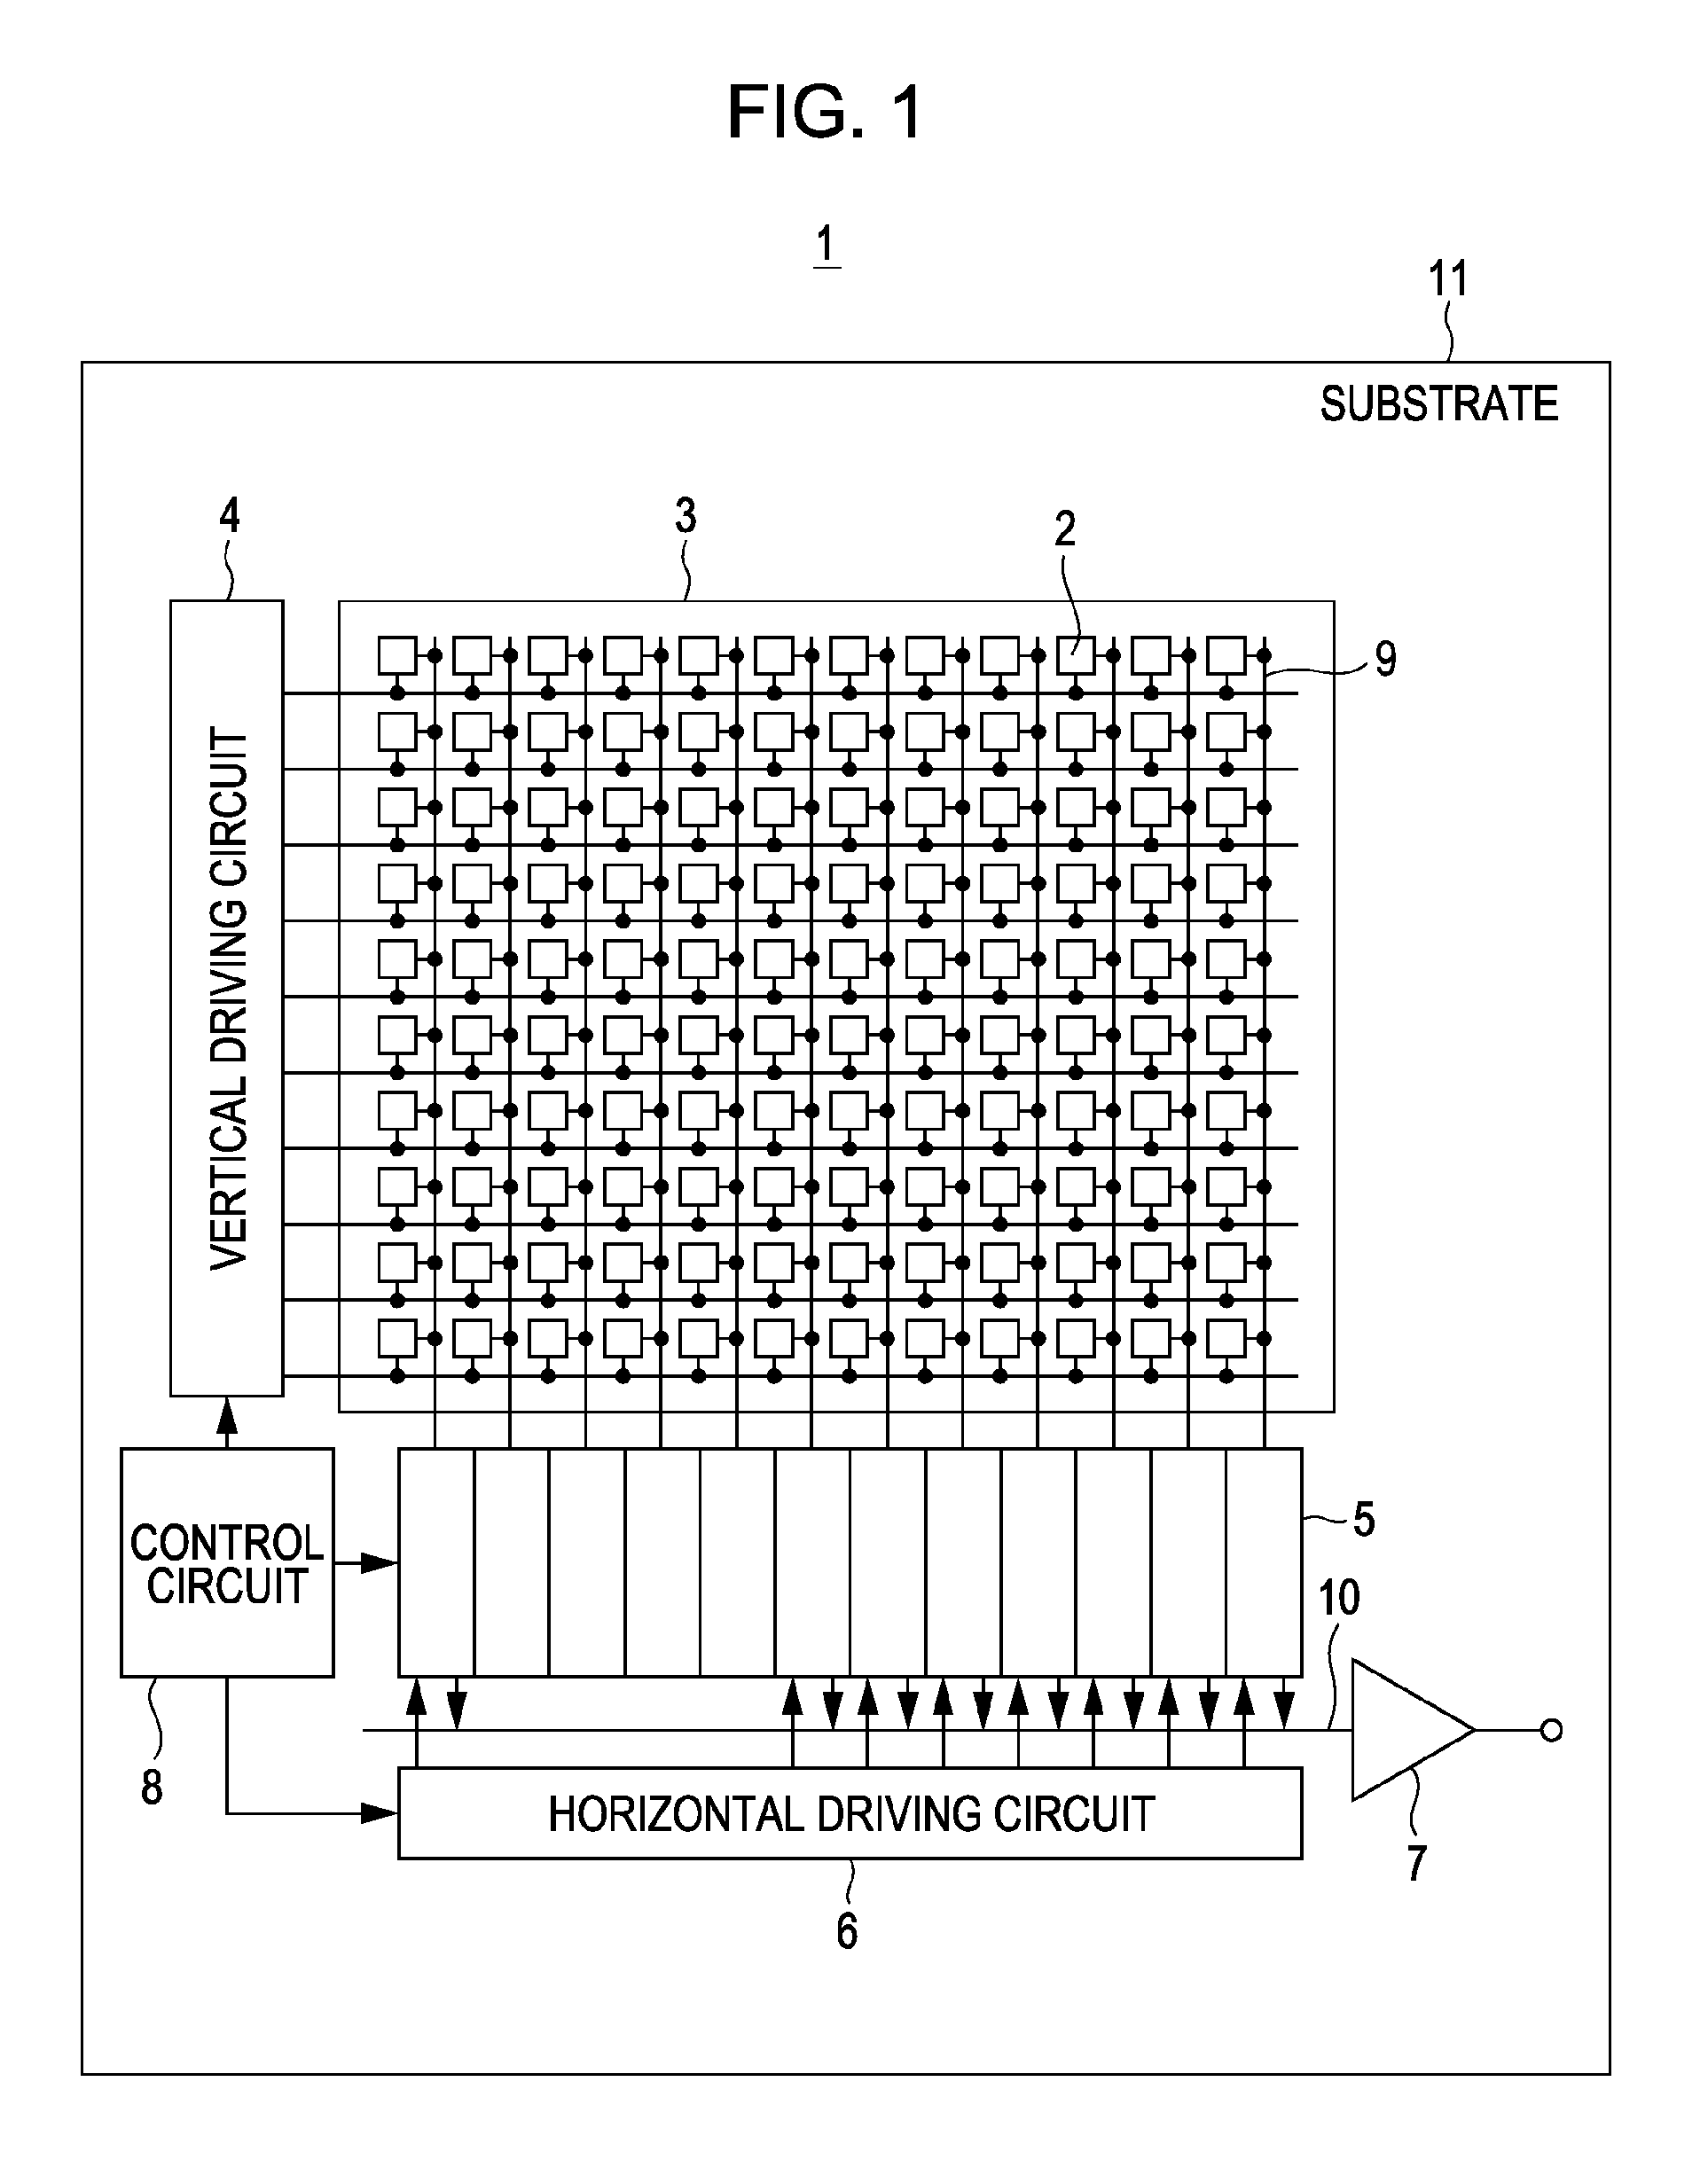 Solid-state imaging device with charge transfer transistor on different substrates